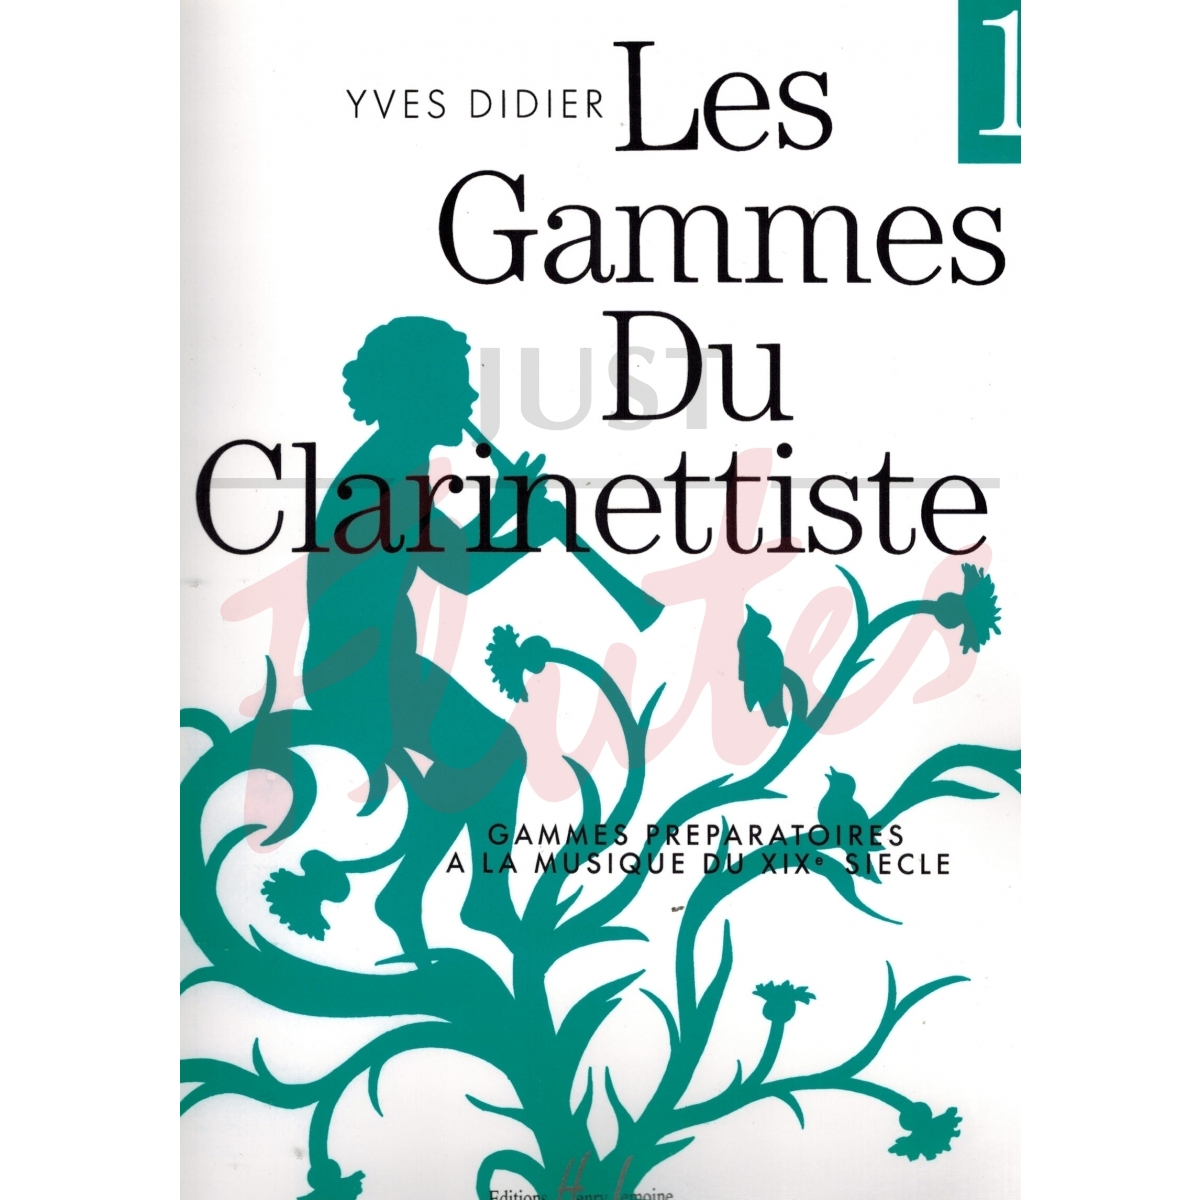 Les Gammes Du Clarinettiste (Scales for Clarinet - Scales for 19th Century Music)